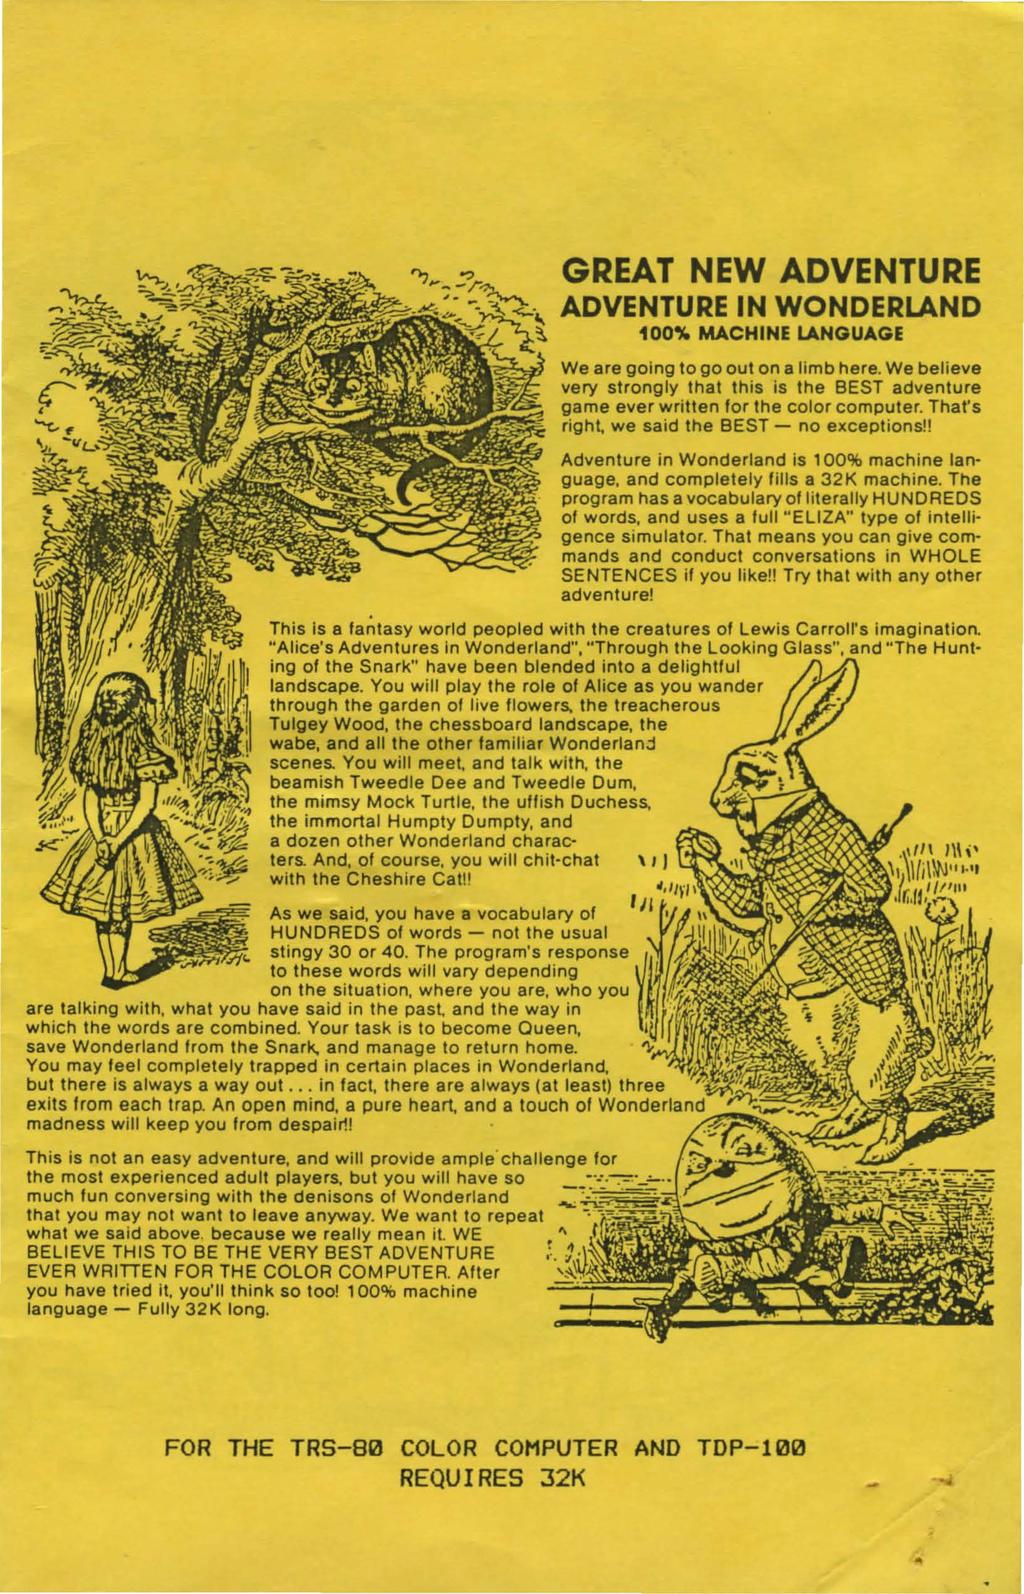 GREAT NEW ADVENTURE ADVENTURE IN WONDERLAND 100% MACHINE LANGUAGE We are going to go out on a limb here.